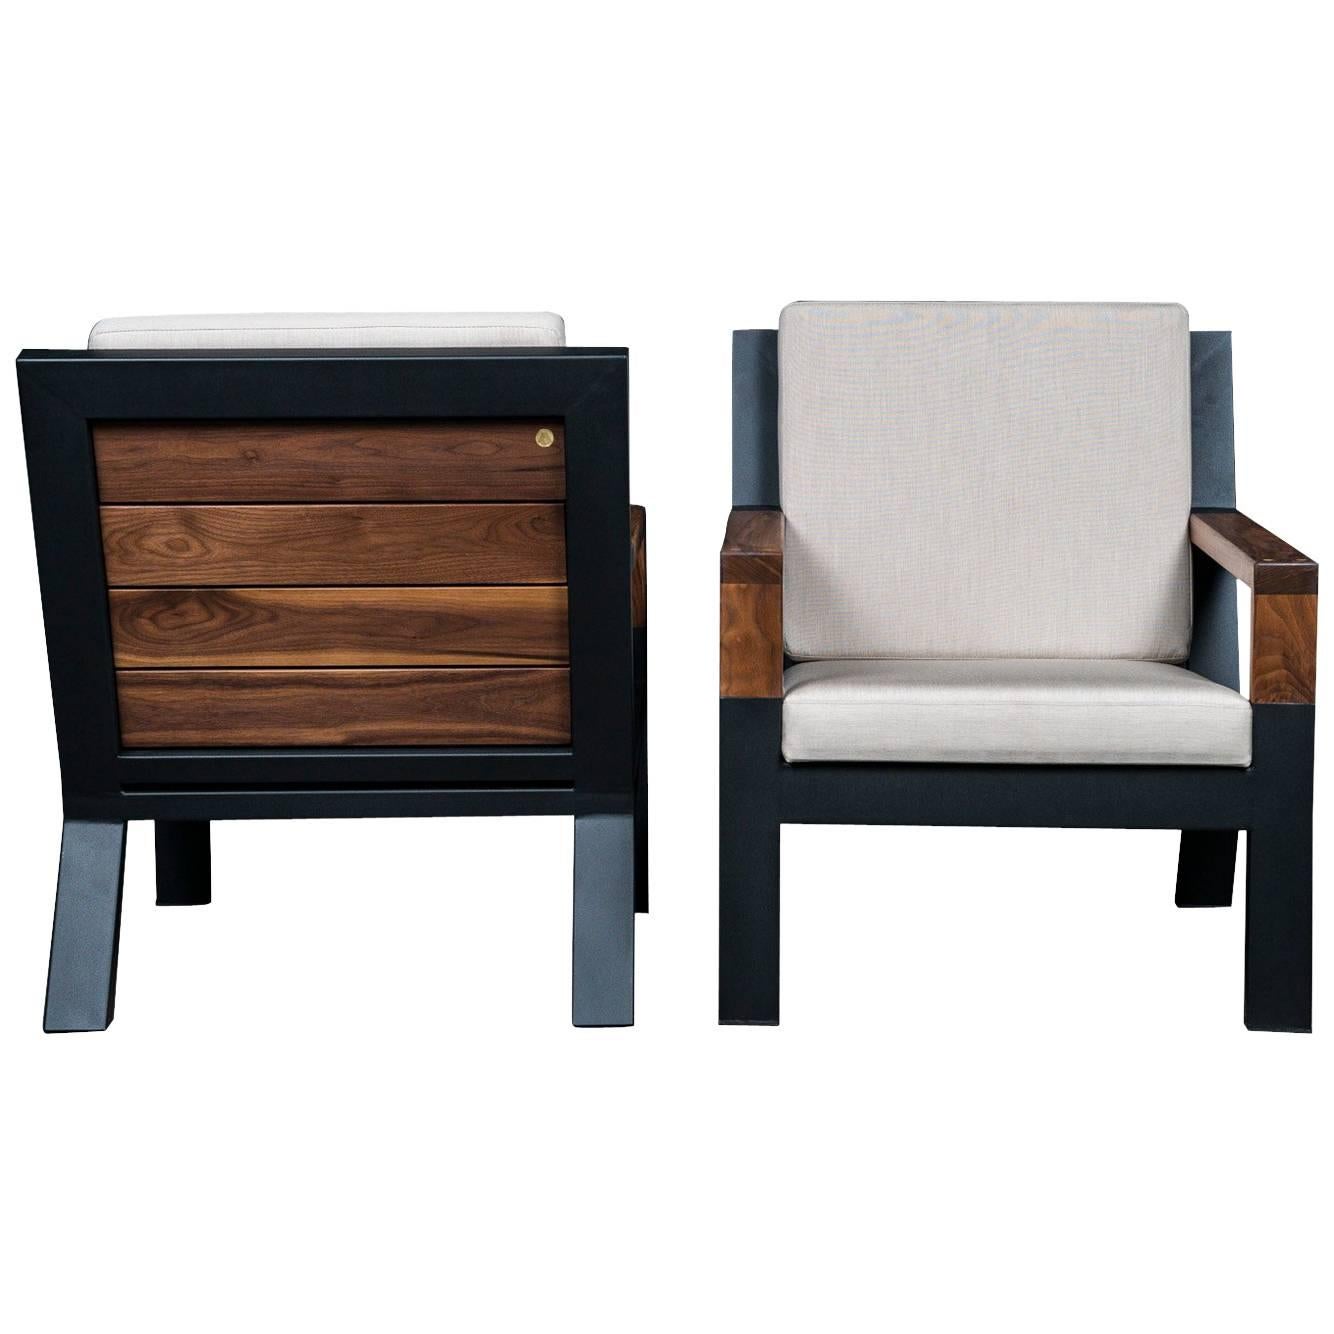 Baltimore Modern Armchair by Ambrozia, Walnut, Black Steel and Beige Upholstery